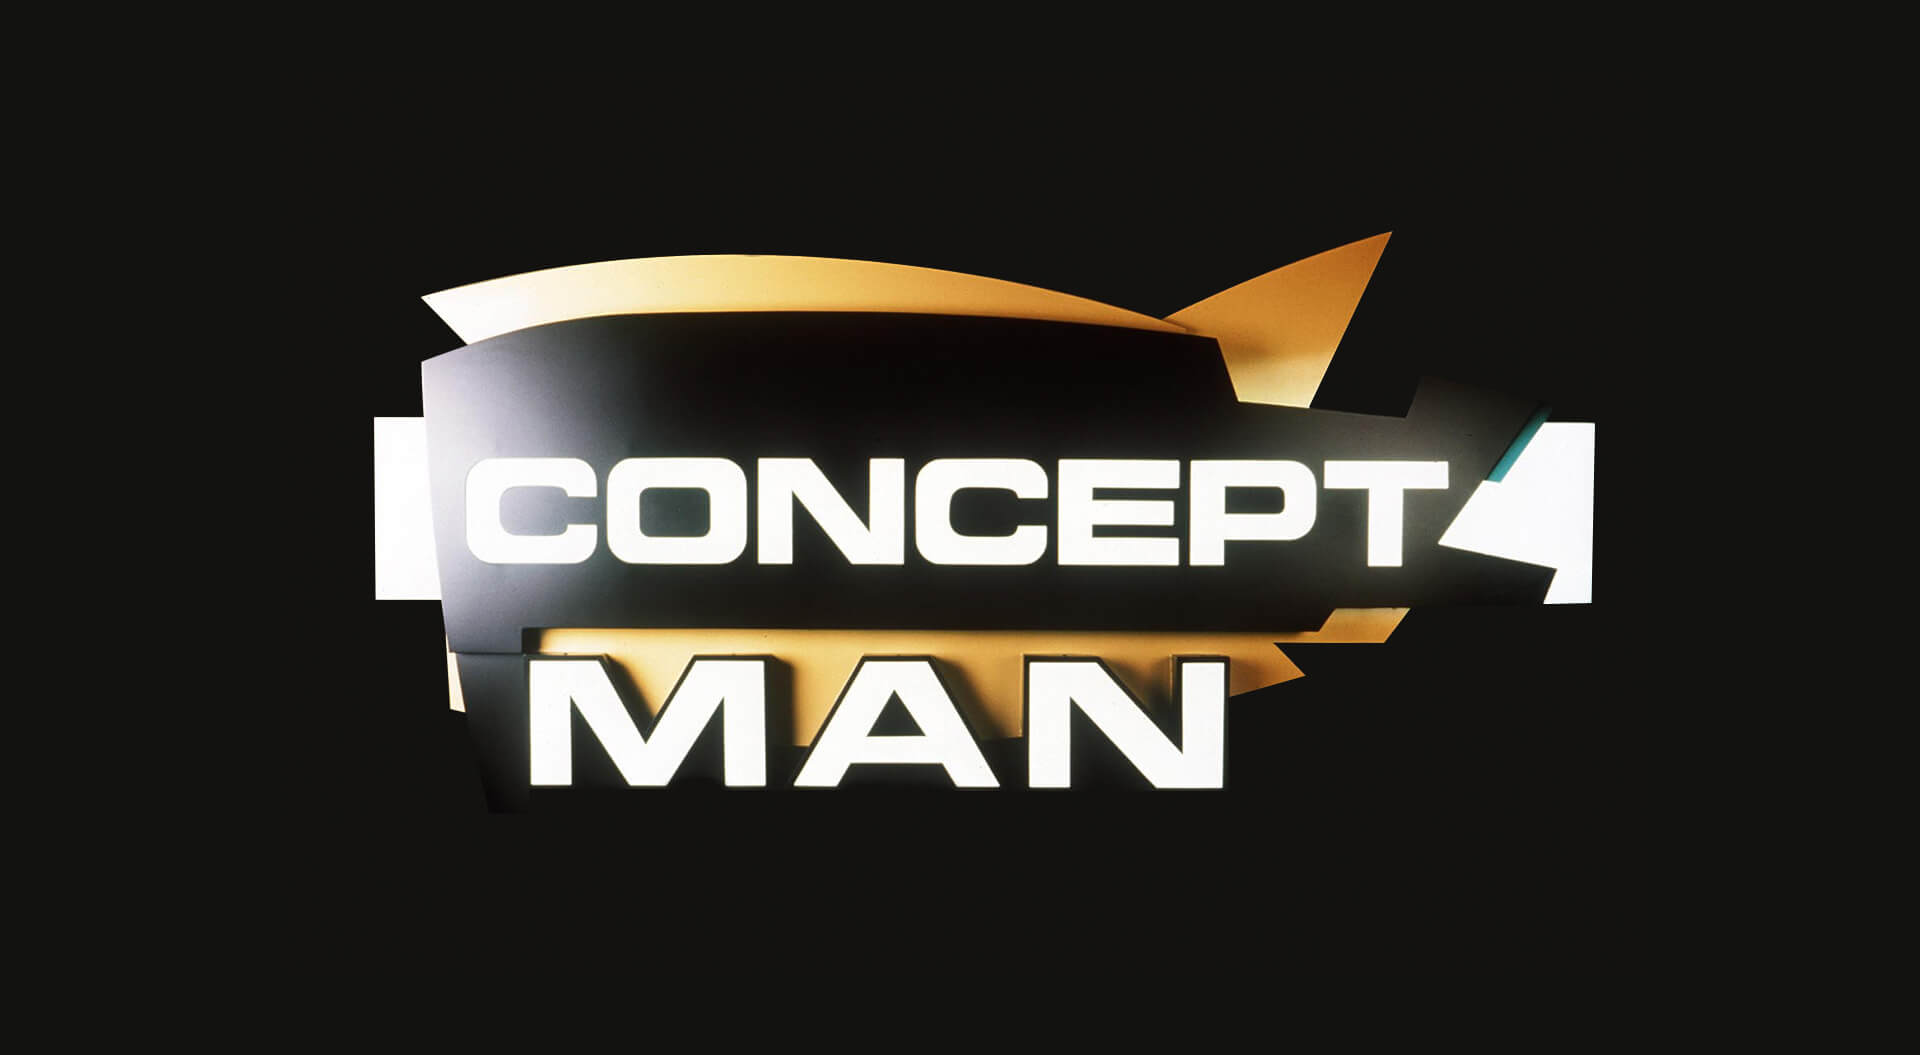 Concept Man brand identity for shop front